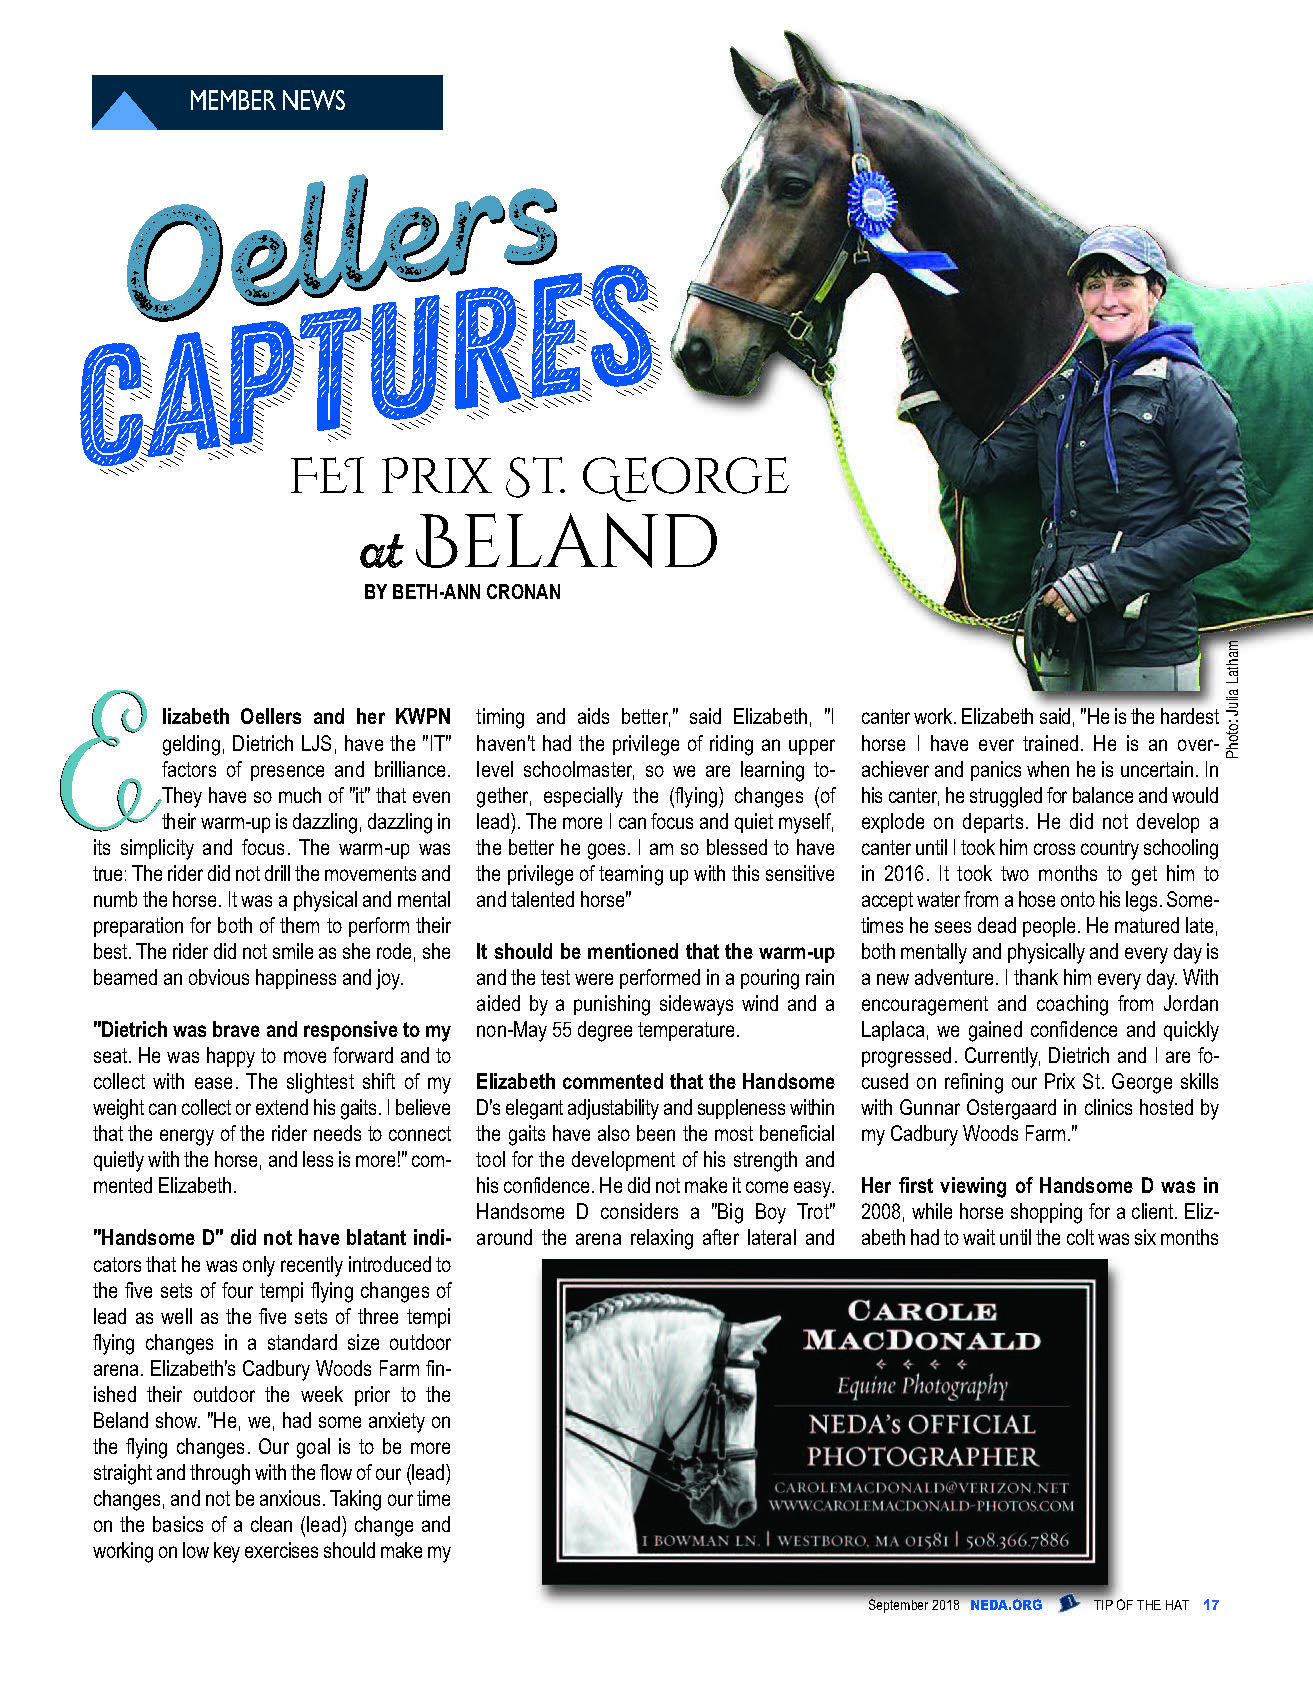 Read article about Elizabeth Oellers in Tip of the Hat Magazine